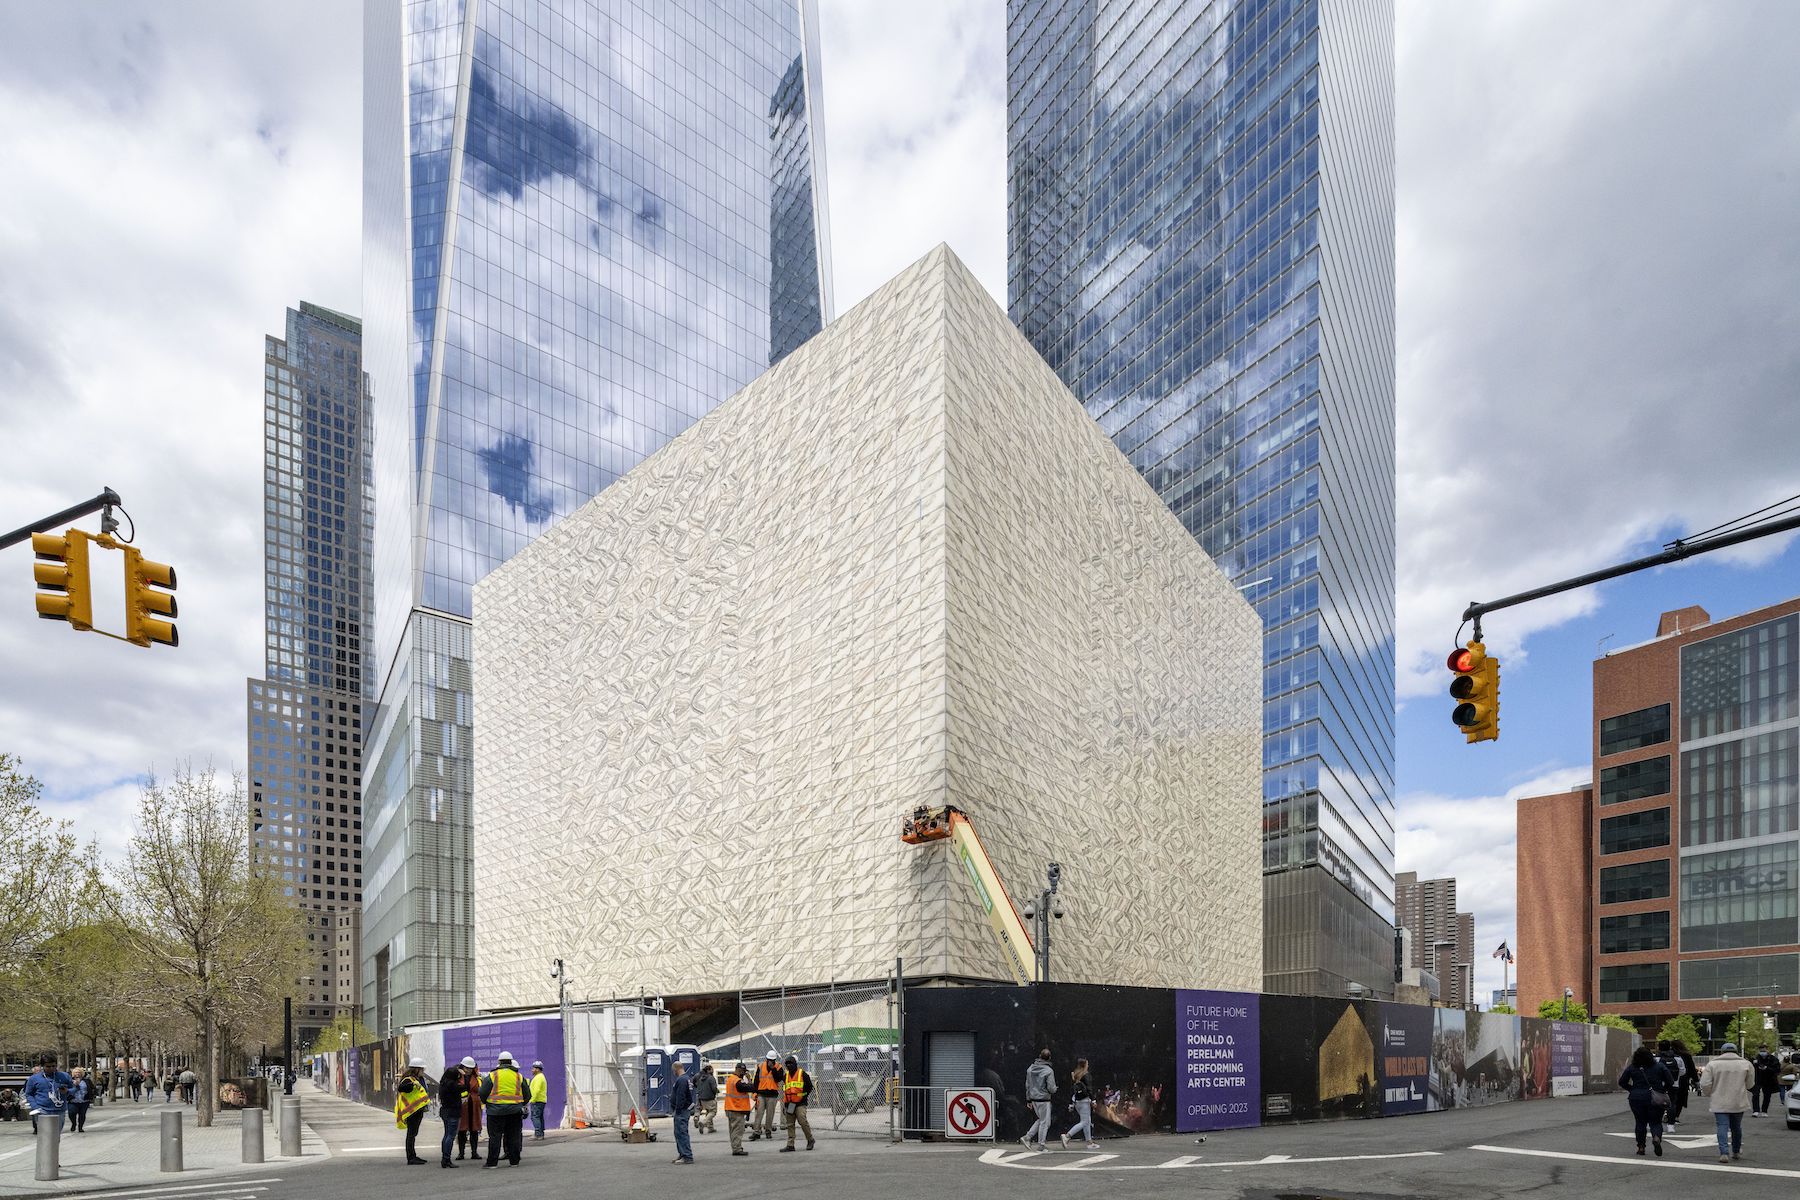 The cube-like Perelman Performing Arts Center will bring new artistic life to New York's downtown.